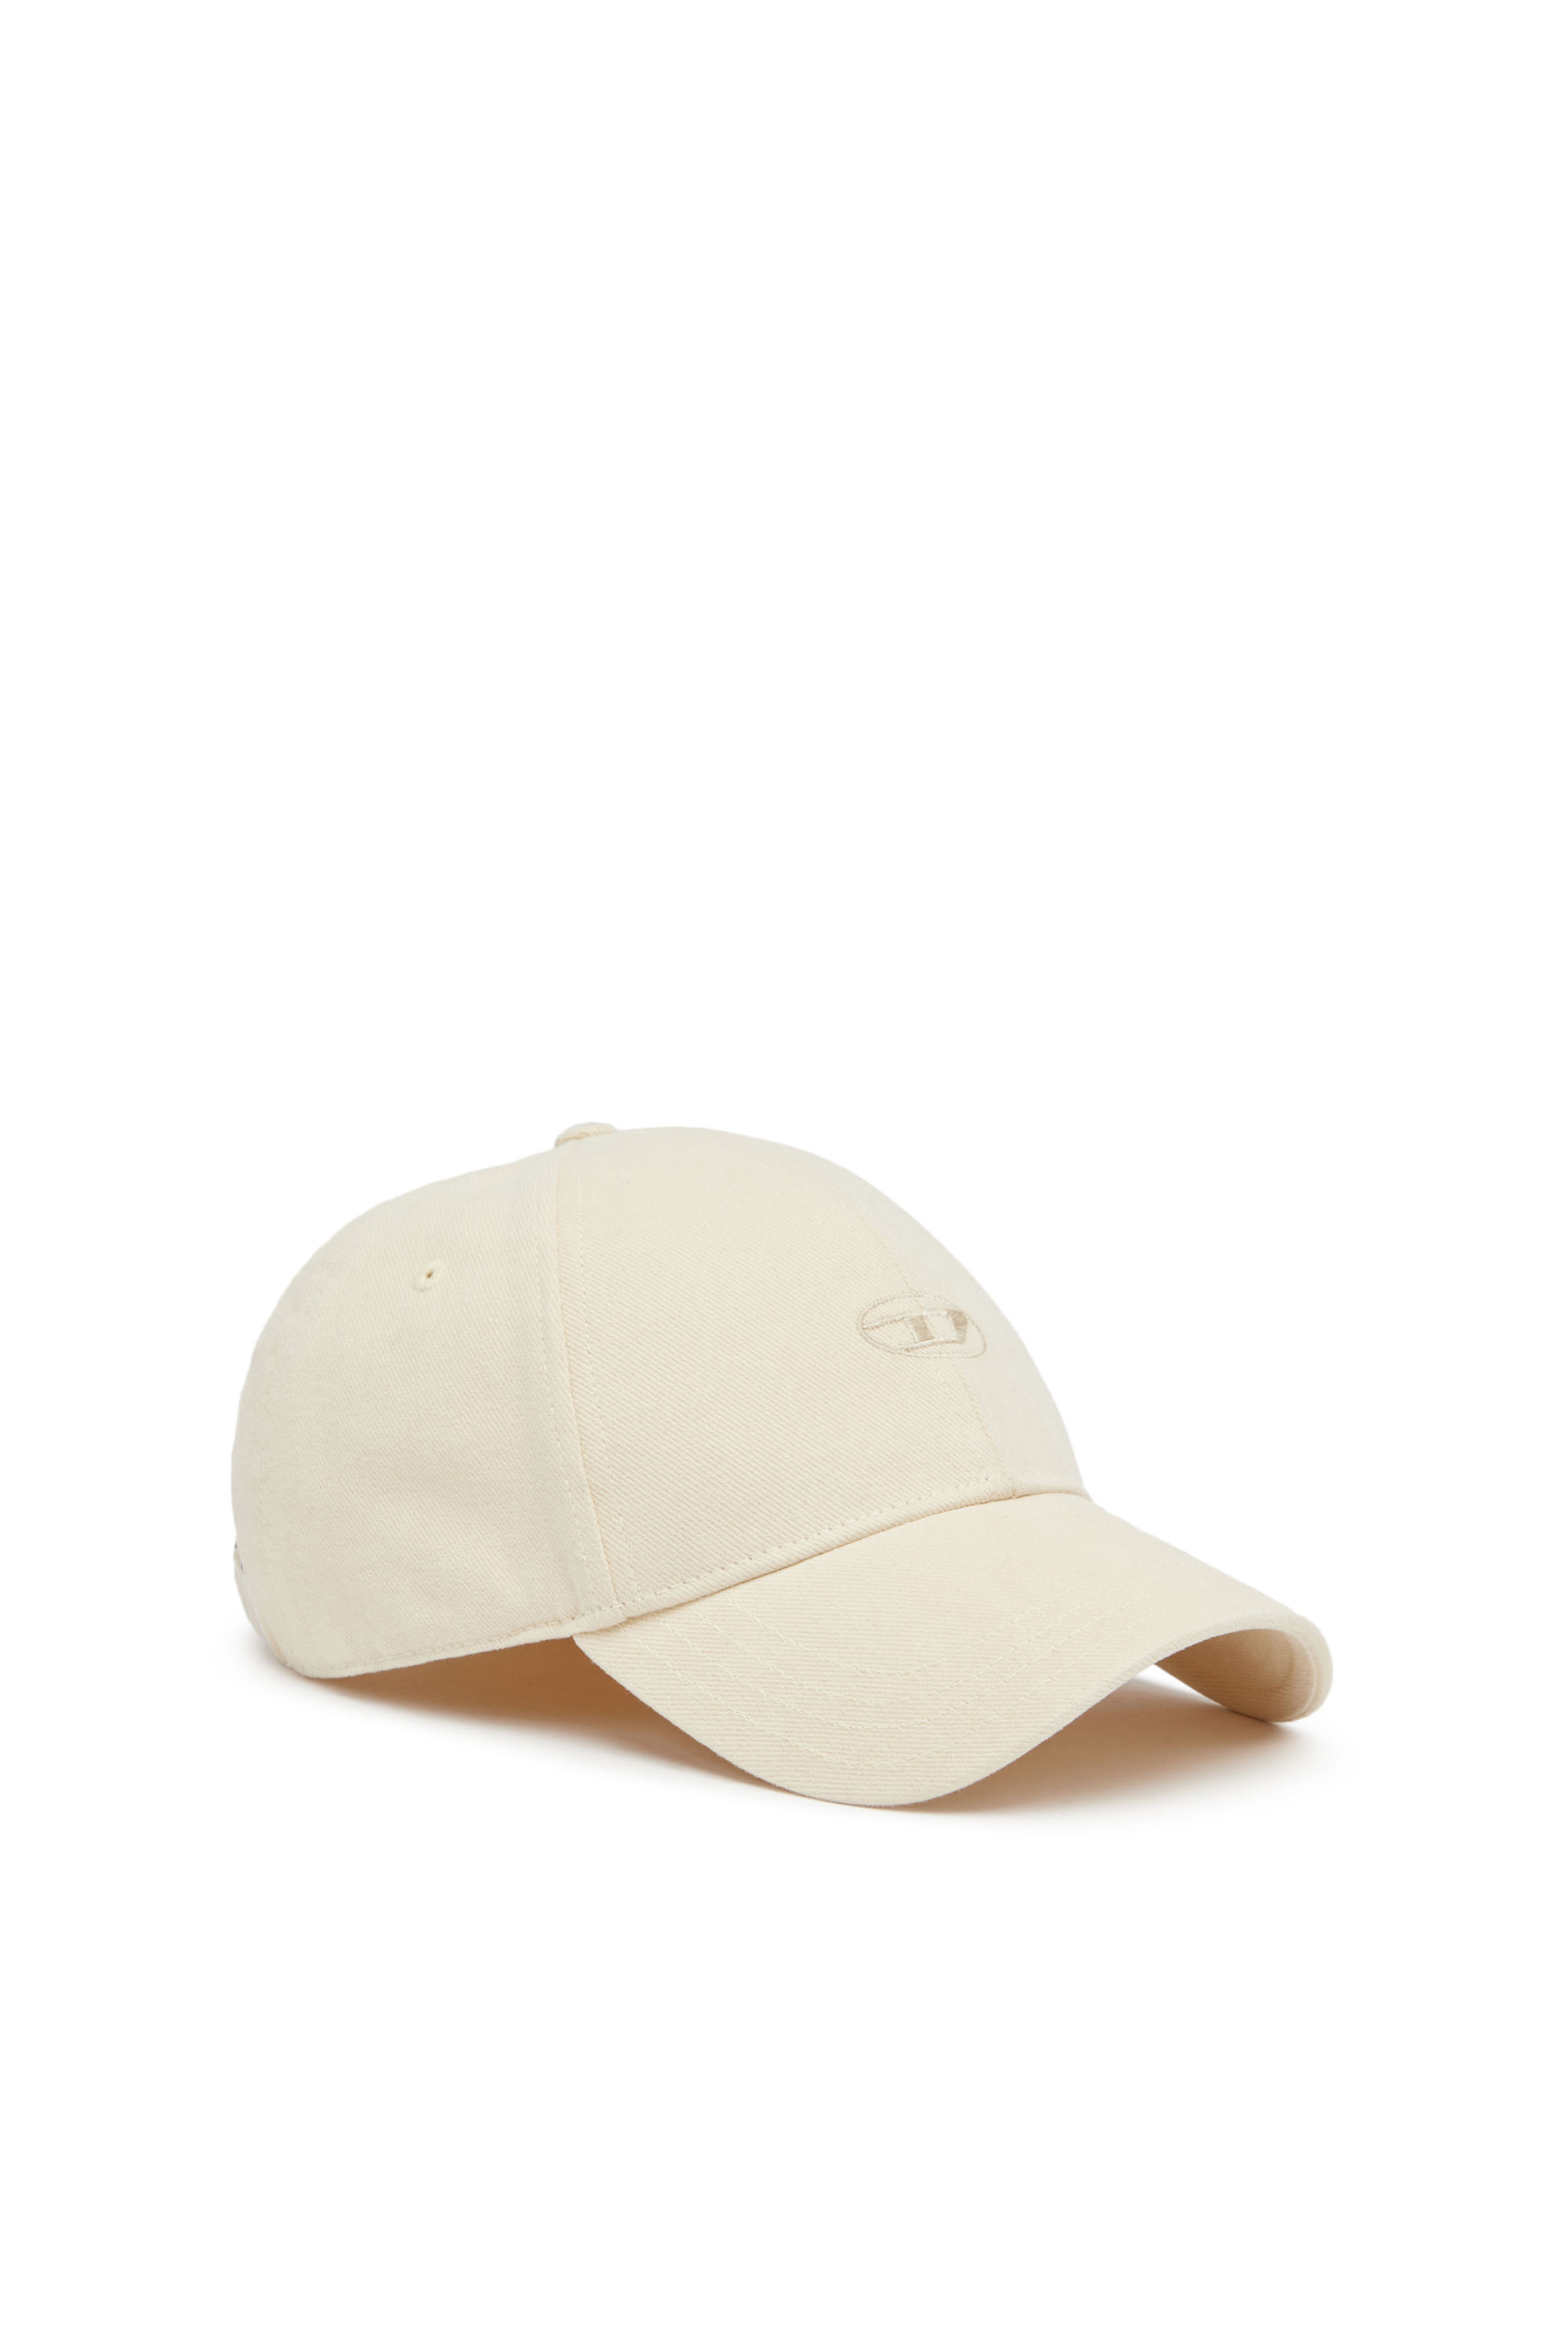 Diesel - Baseball cap in washed cotton twill - Caps - Man - White